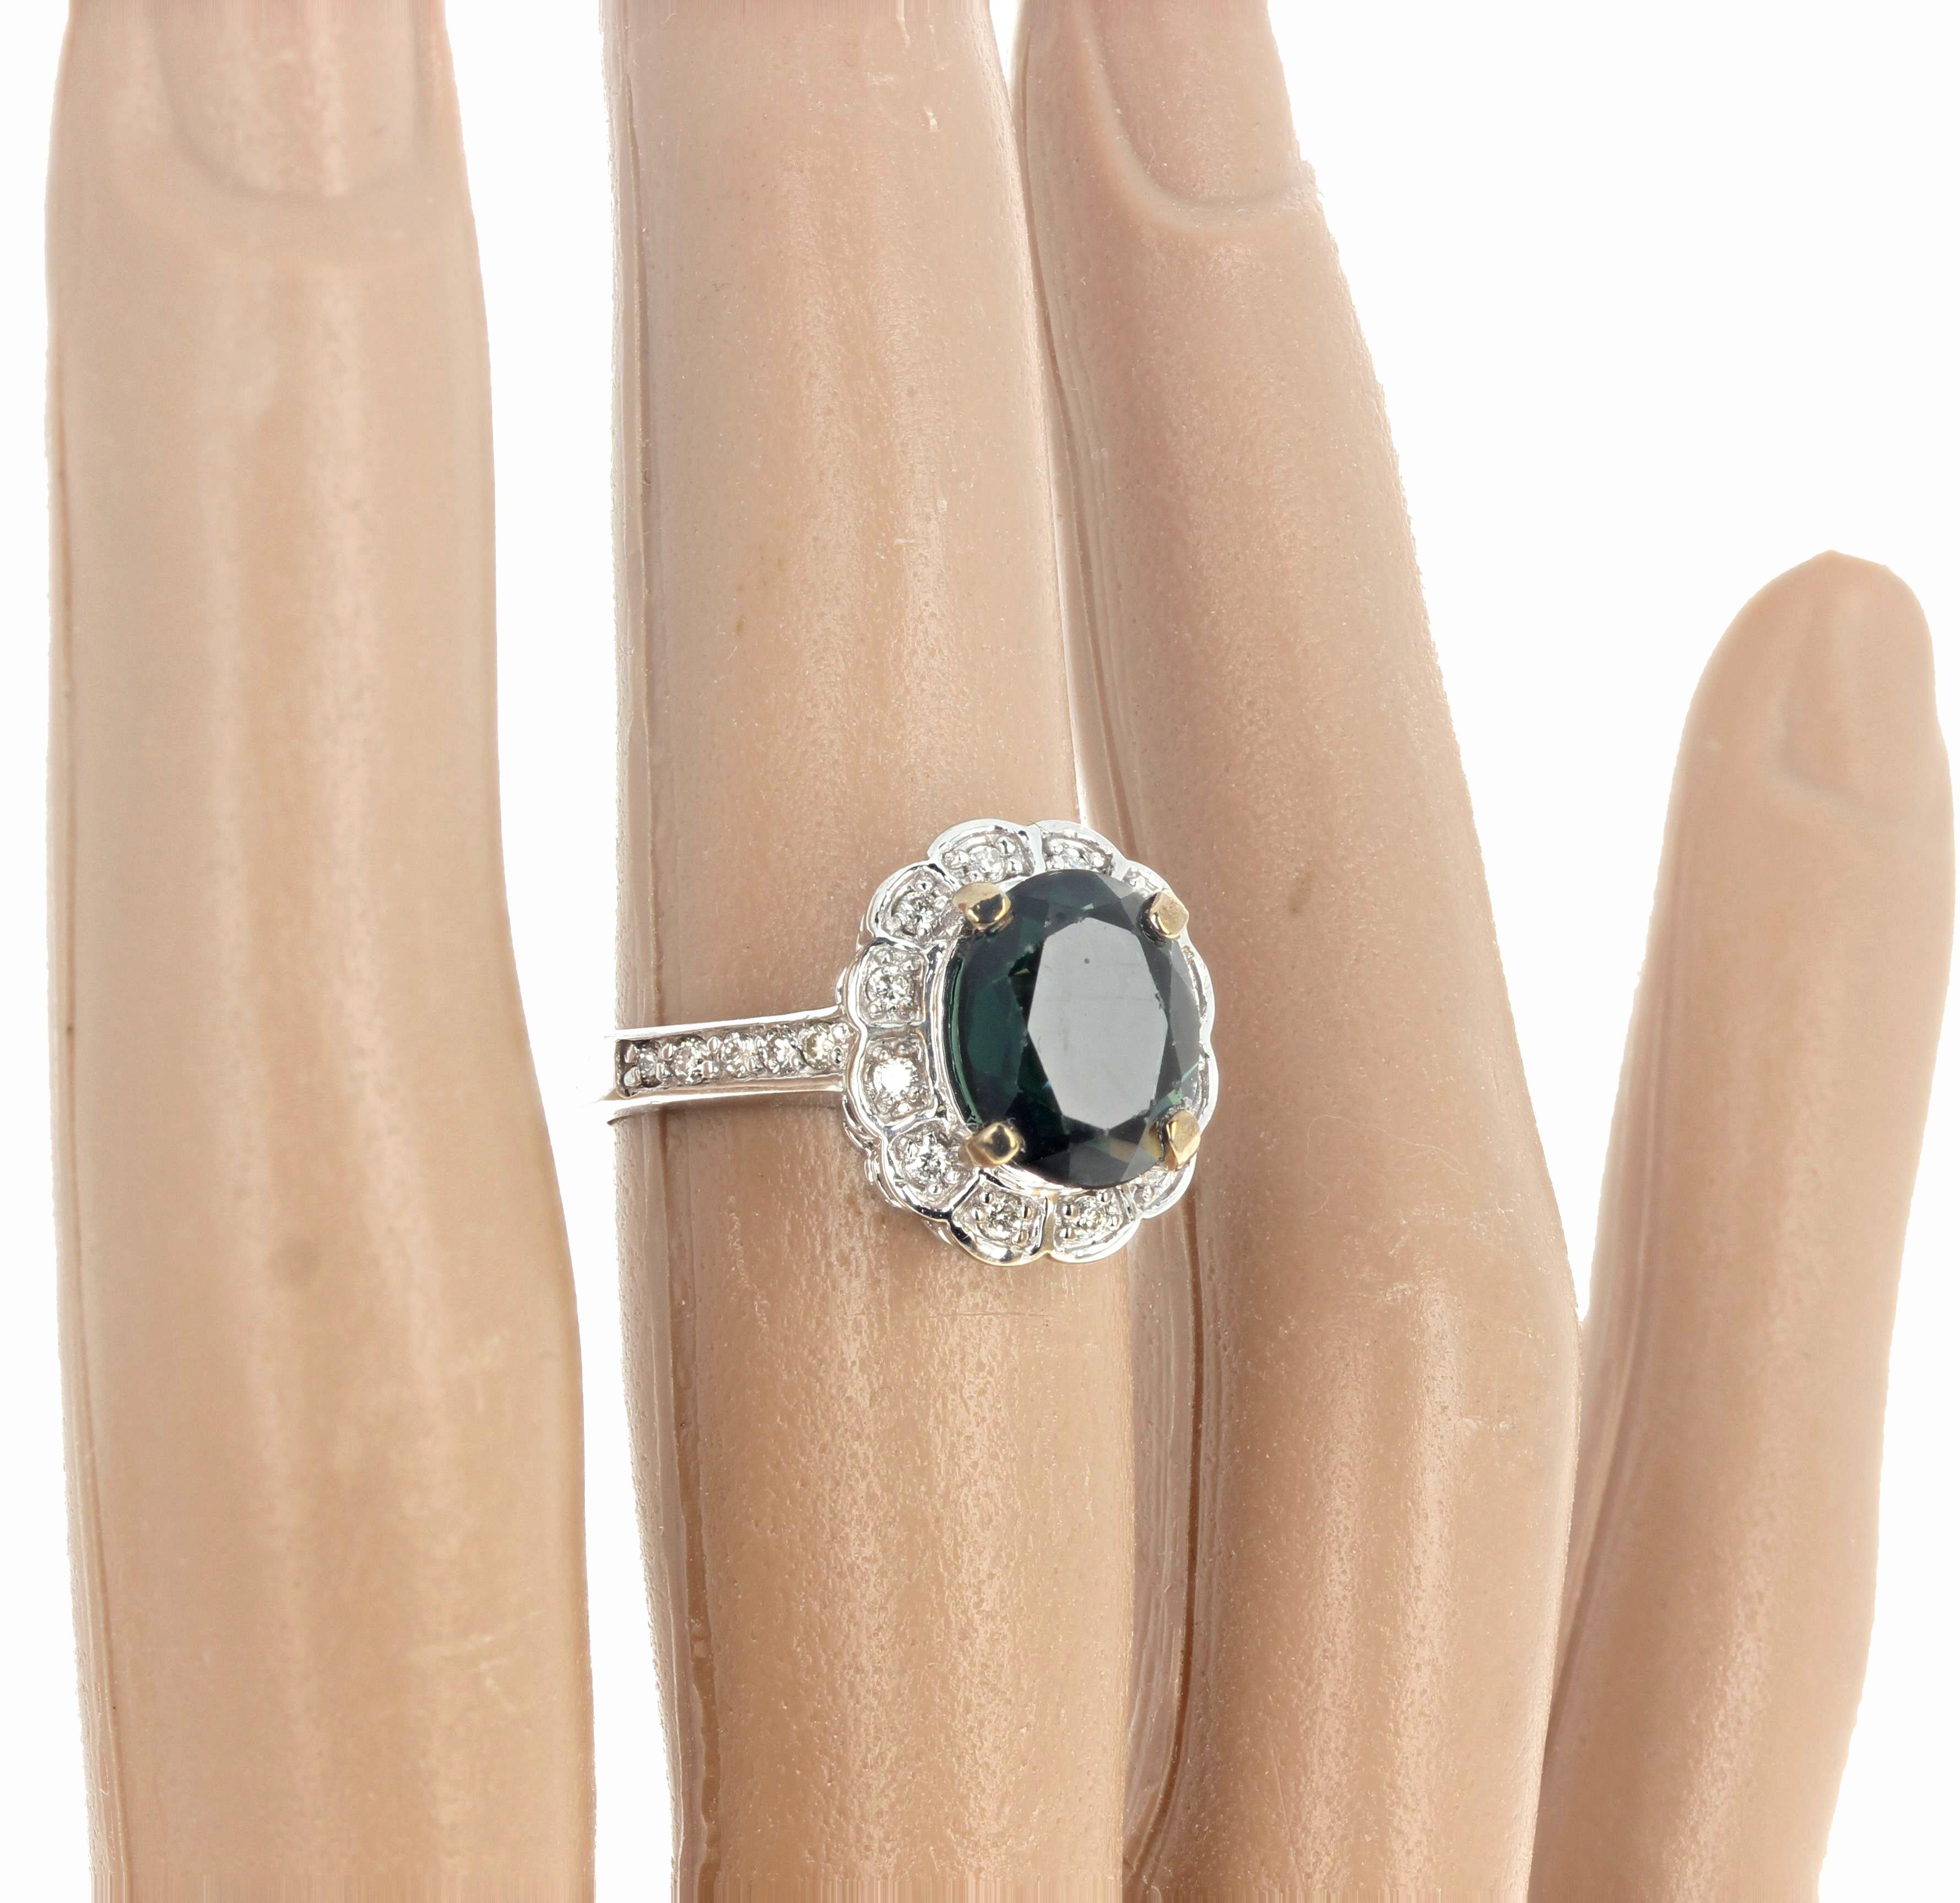 Women's or Men's AJD Intensely Glowing 2.23 Ct Green Apatite & White Diamonds Ring For Sale